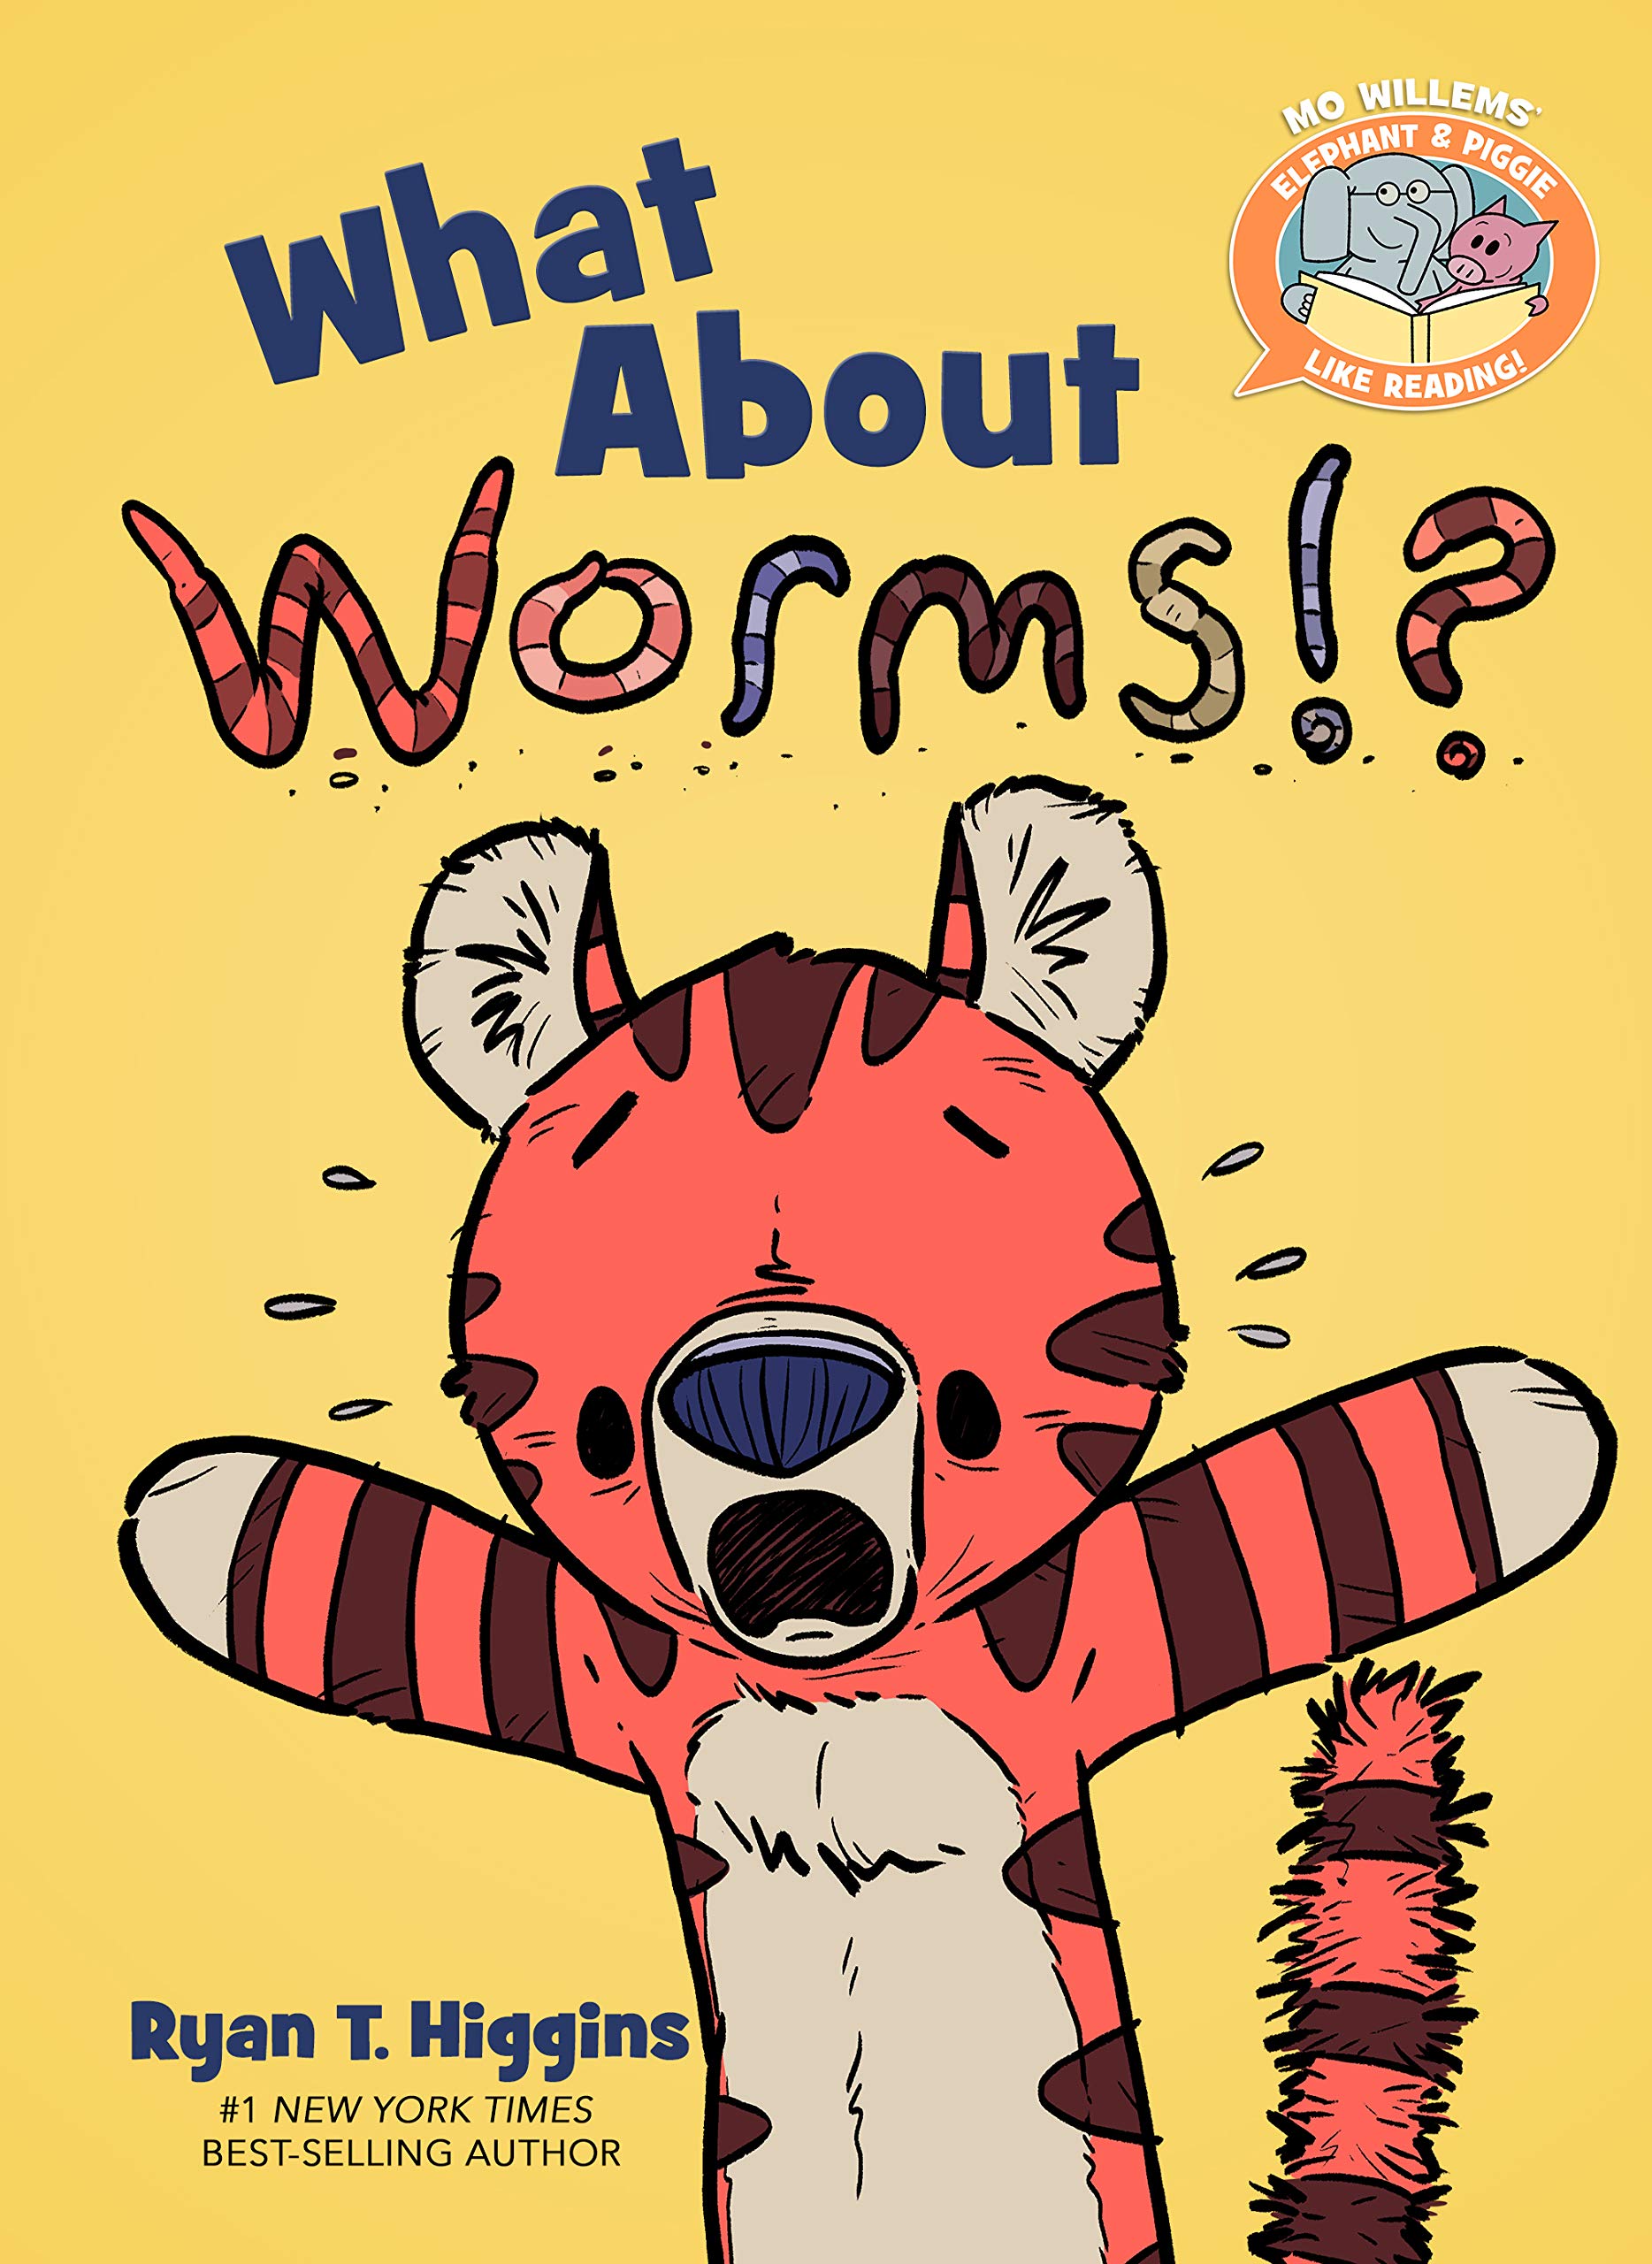 Cover of book What About Worms by Ryan T Higgins shows a cartoon tiger looking worried